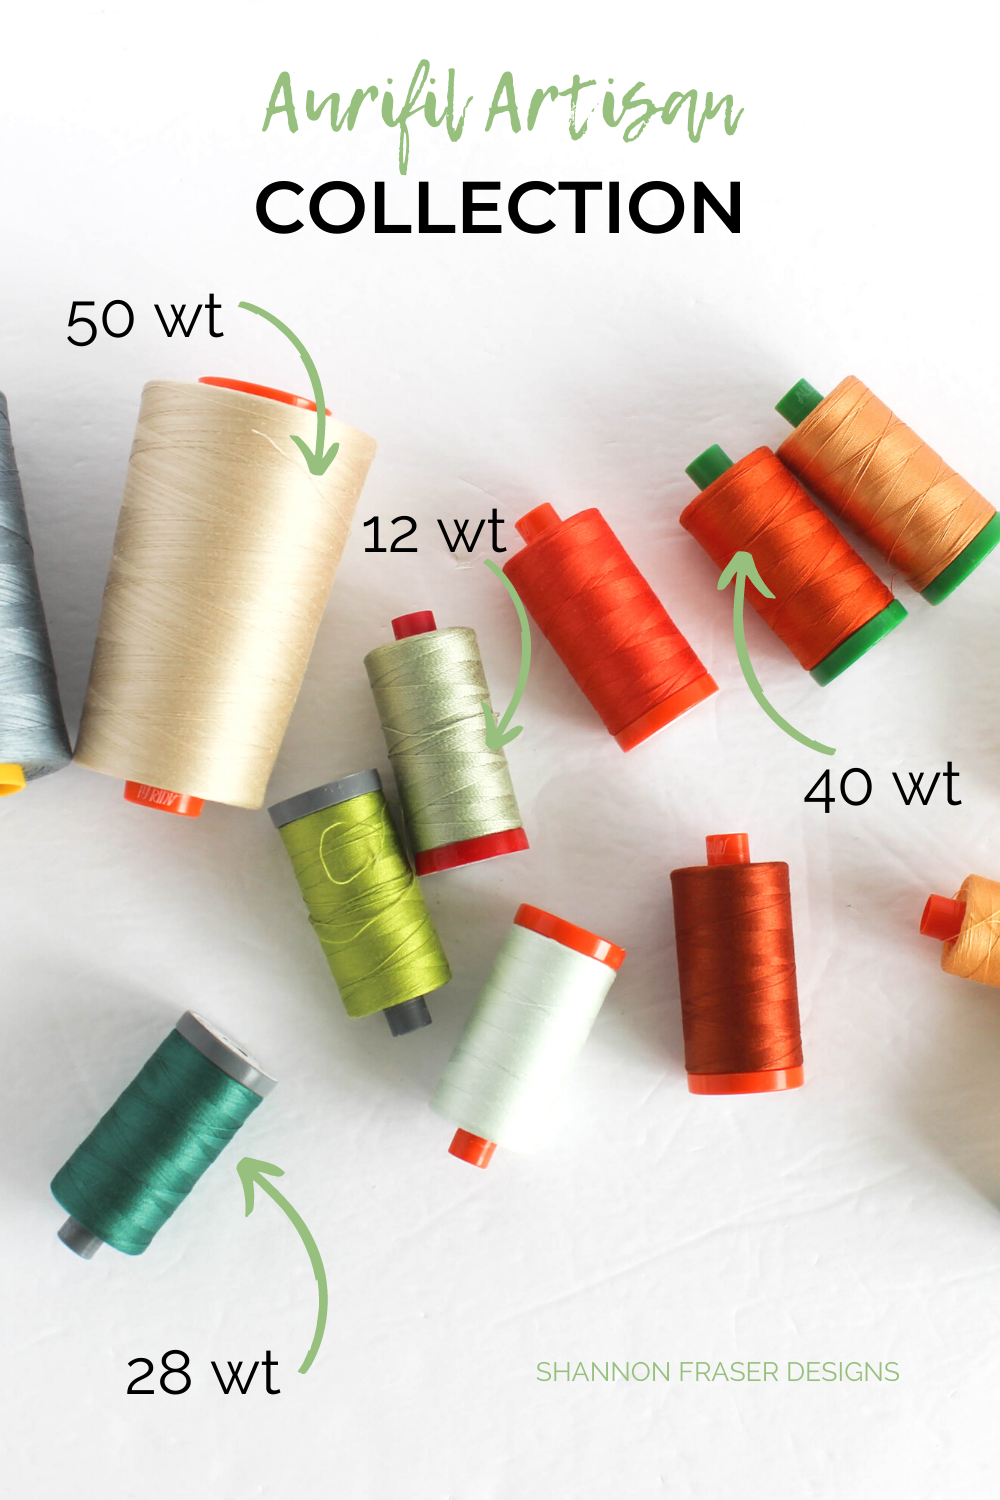 Different Aurifil Thread weights included in the Aurifil Artisan 2021 Collection | Shannon Fraser Designs #threadweight